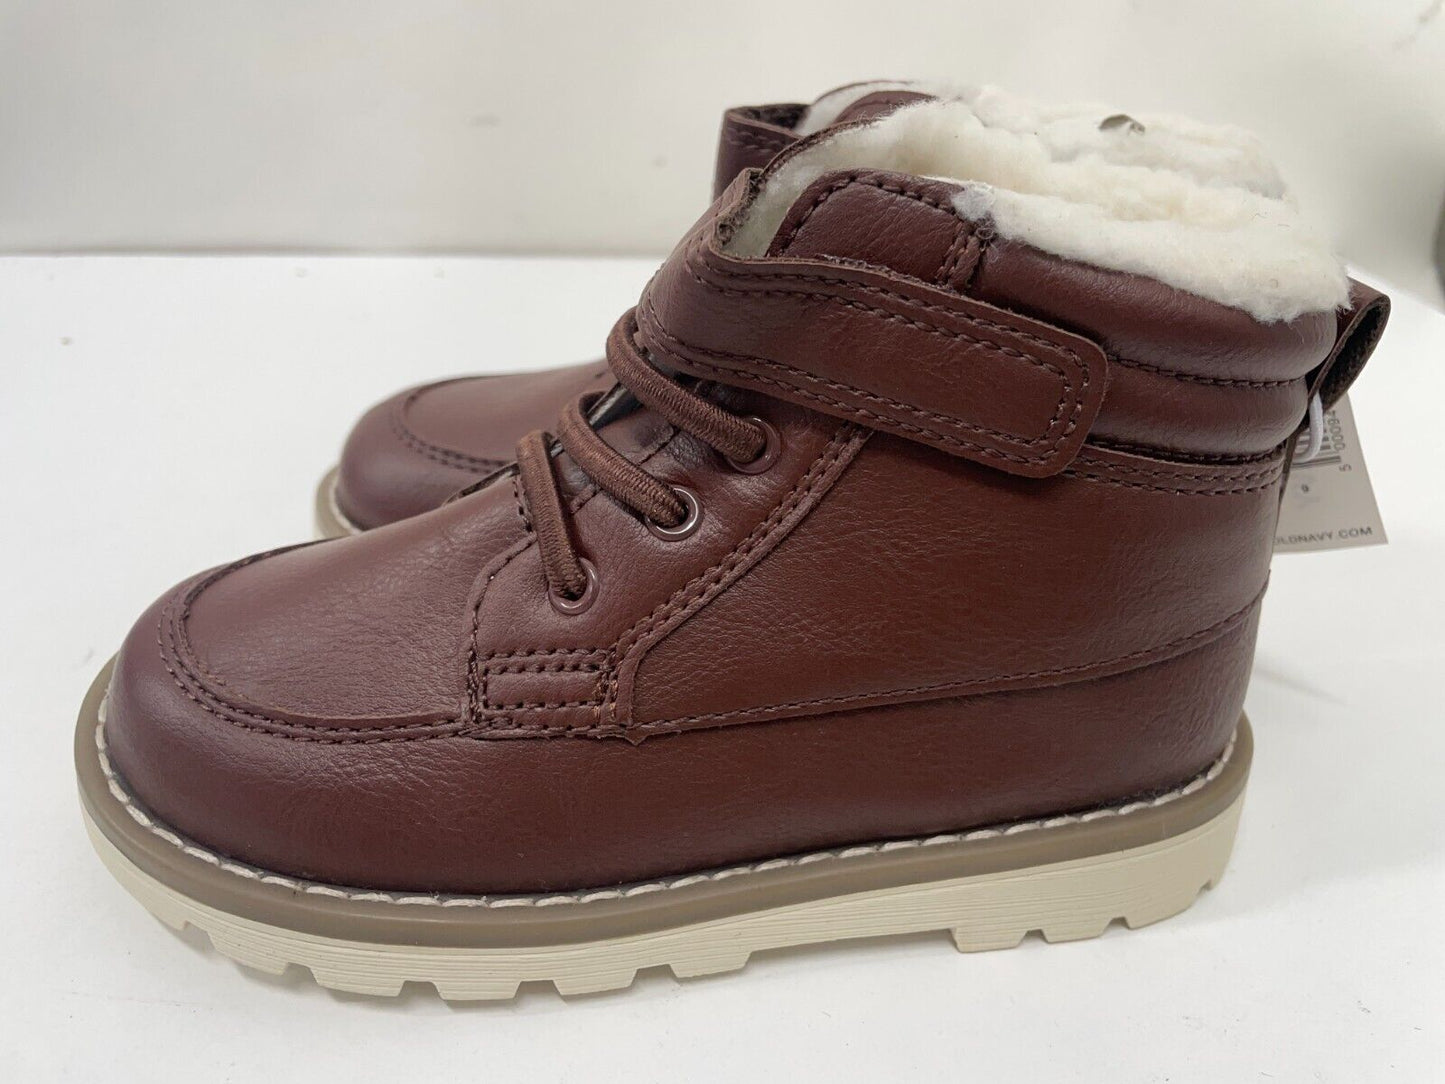 Old Navy Kids Boys 9 Cognac Ankle Dress Boot Faux Leather Sherpa Lining 497375